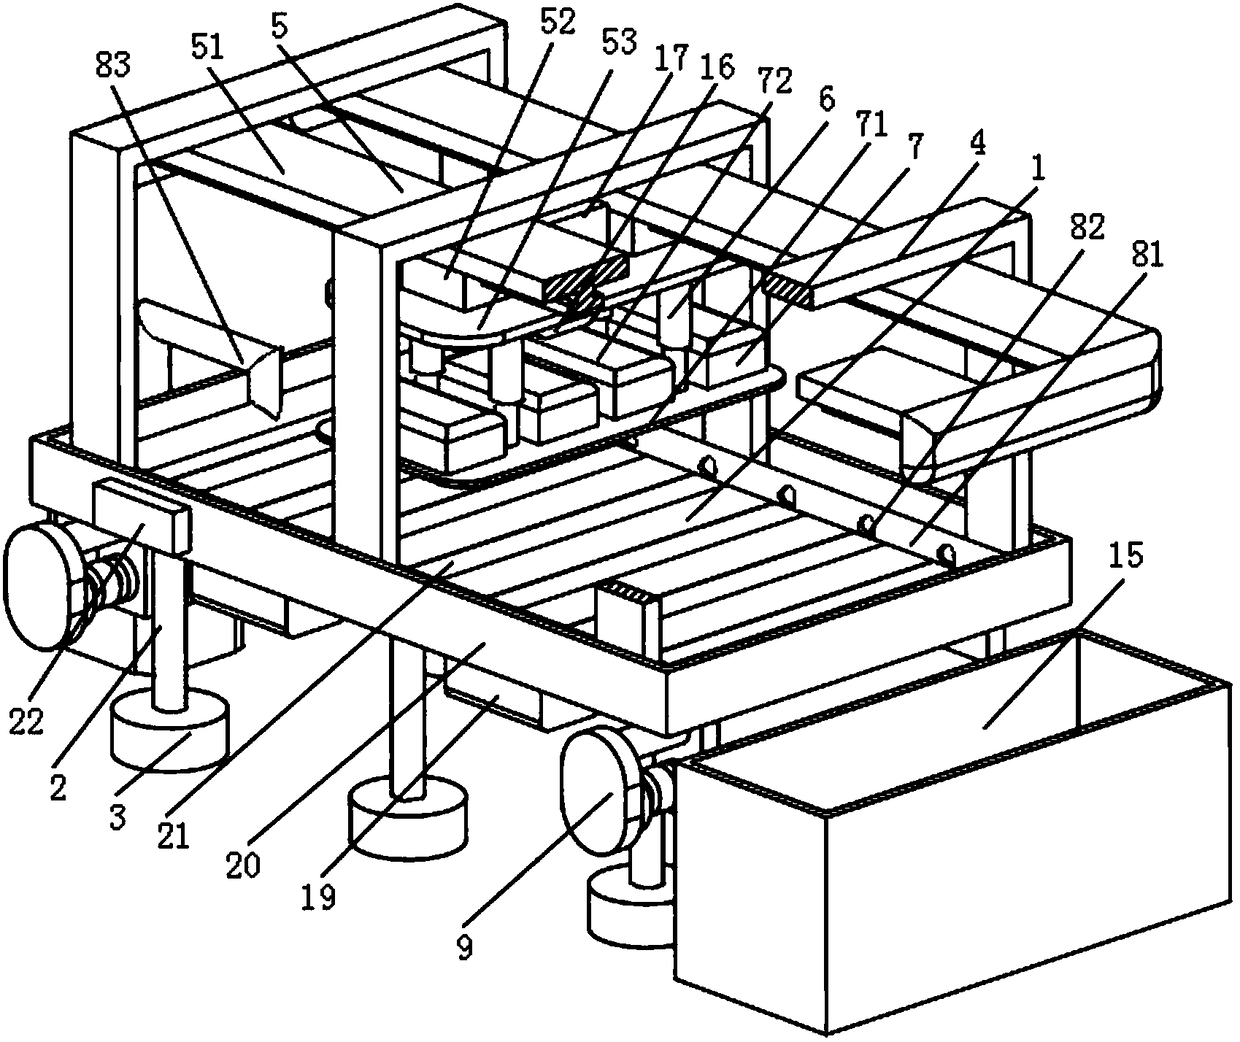 Numerical control machine tool workbench with cleaning mechanism